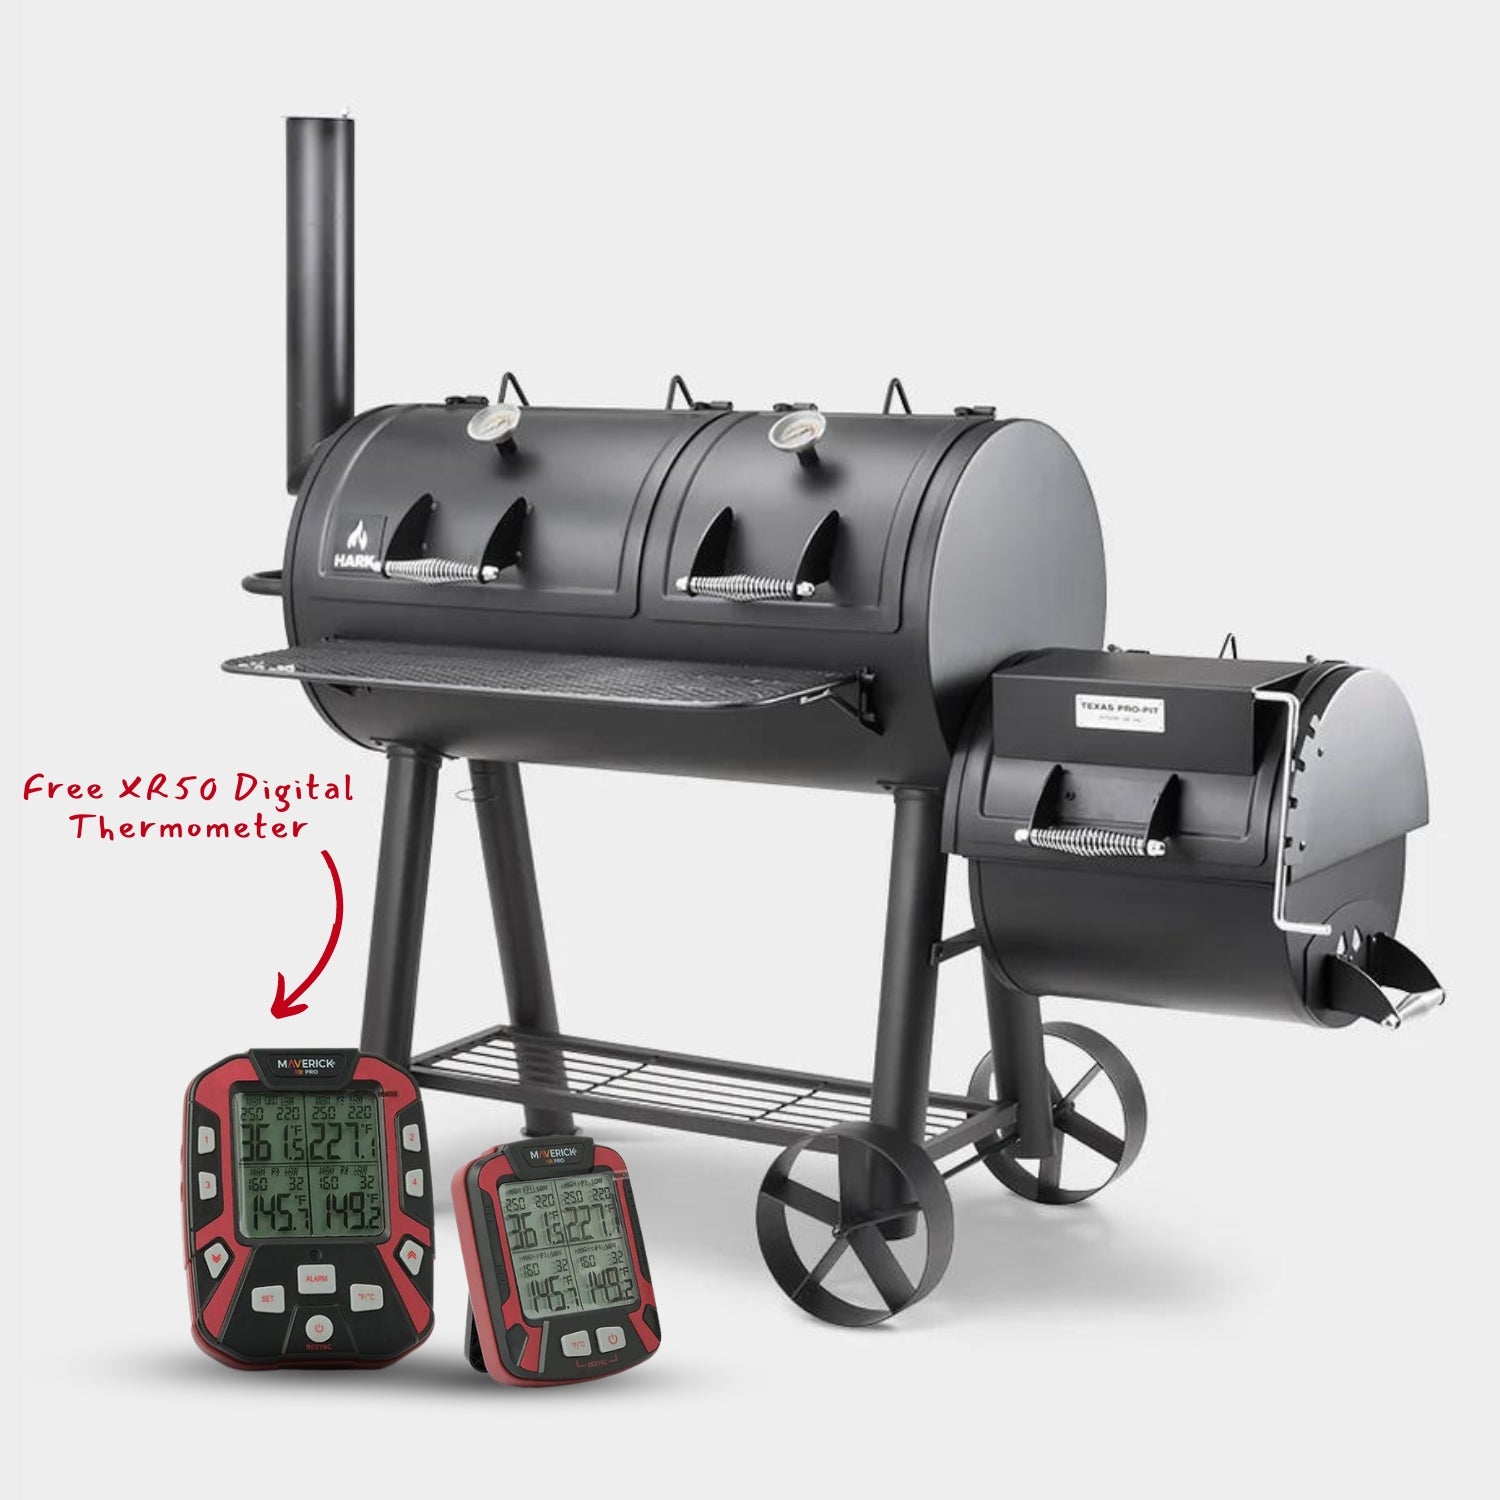 Hark Texas Pro Pit Offset Smoker Special